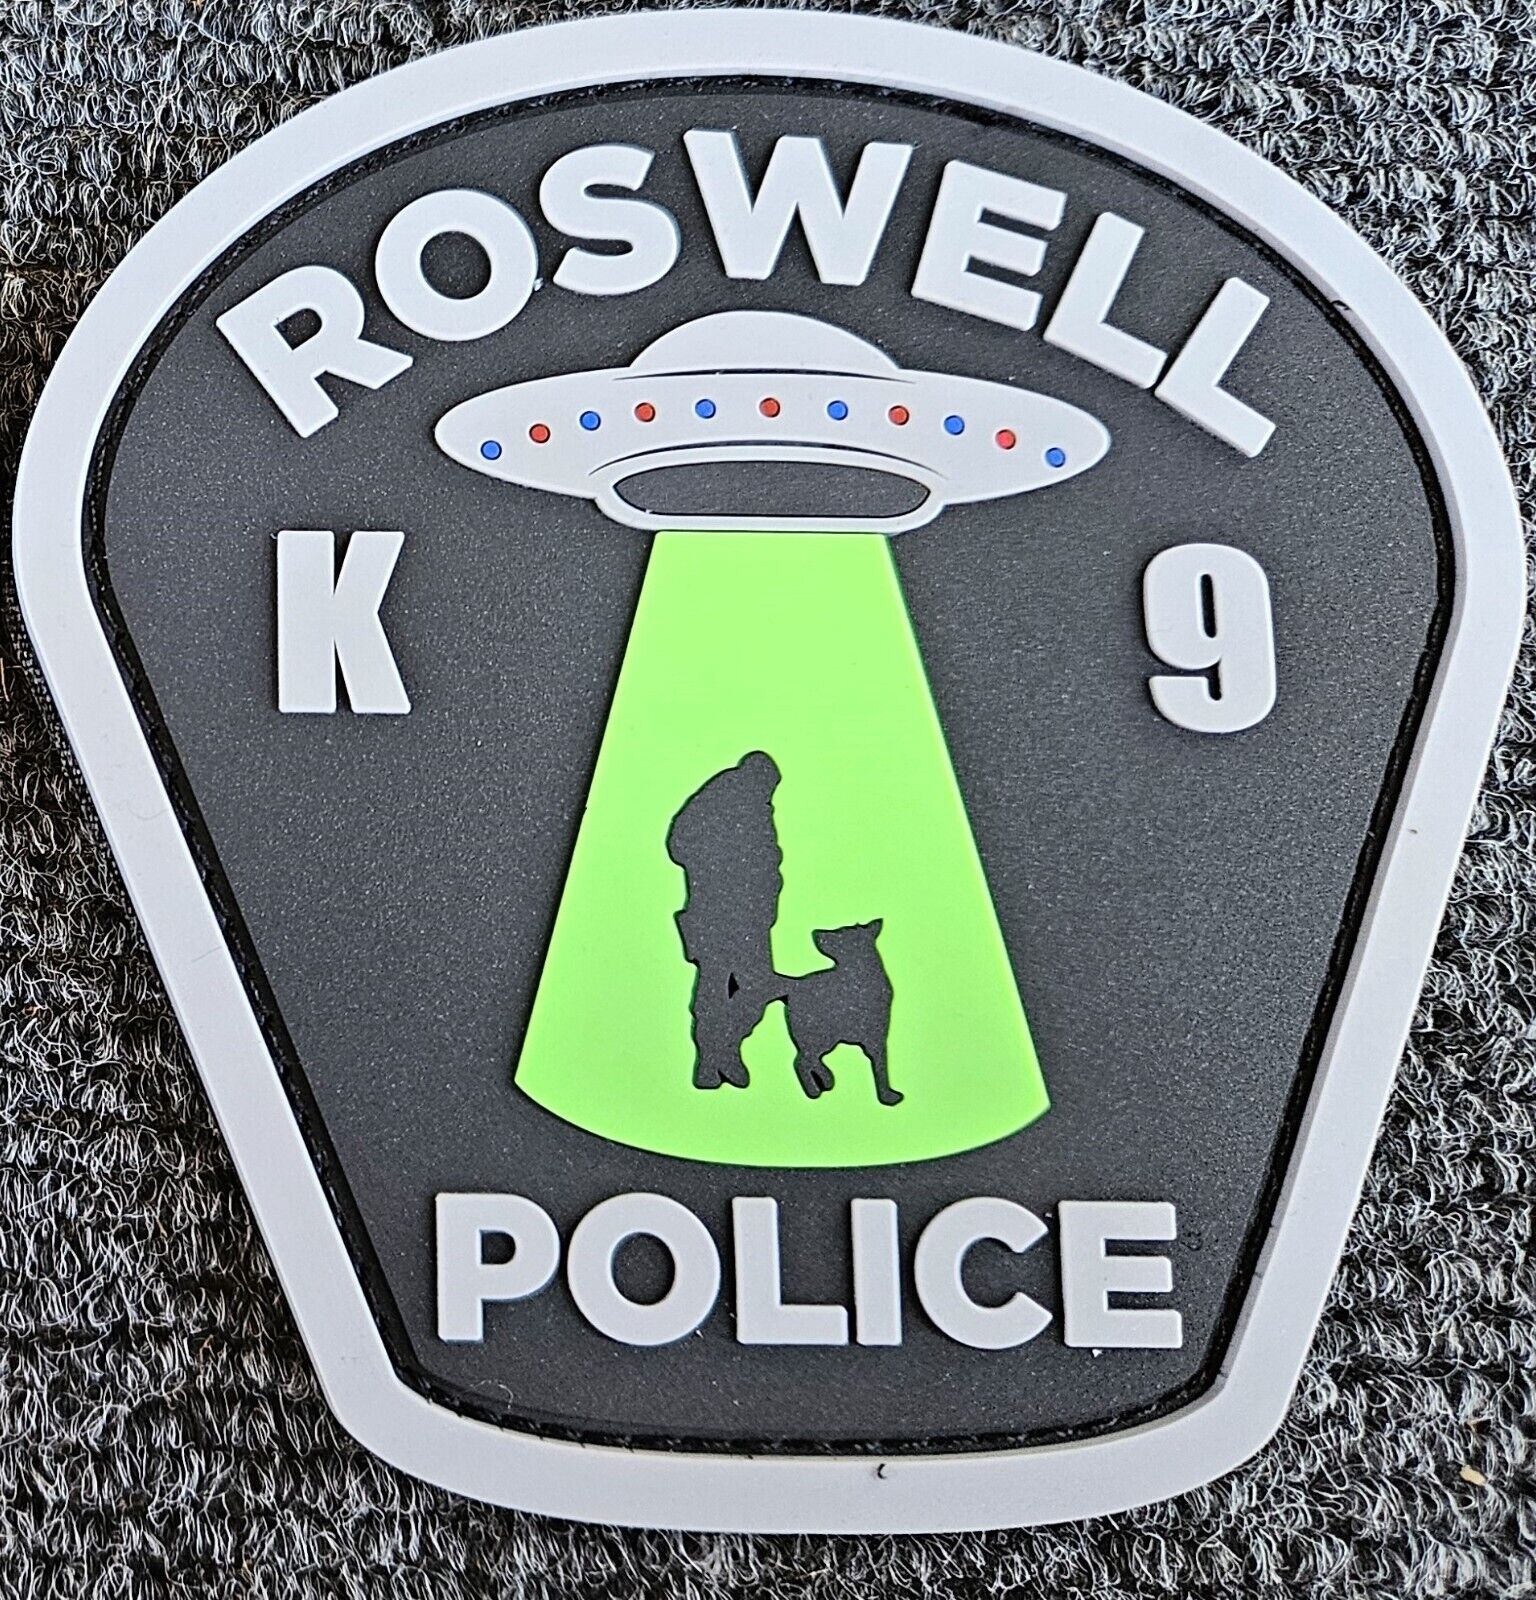 Roswell New Mexico Police K9 Patch